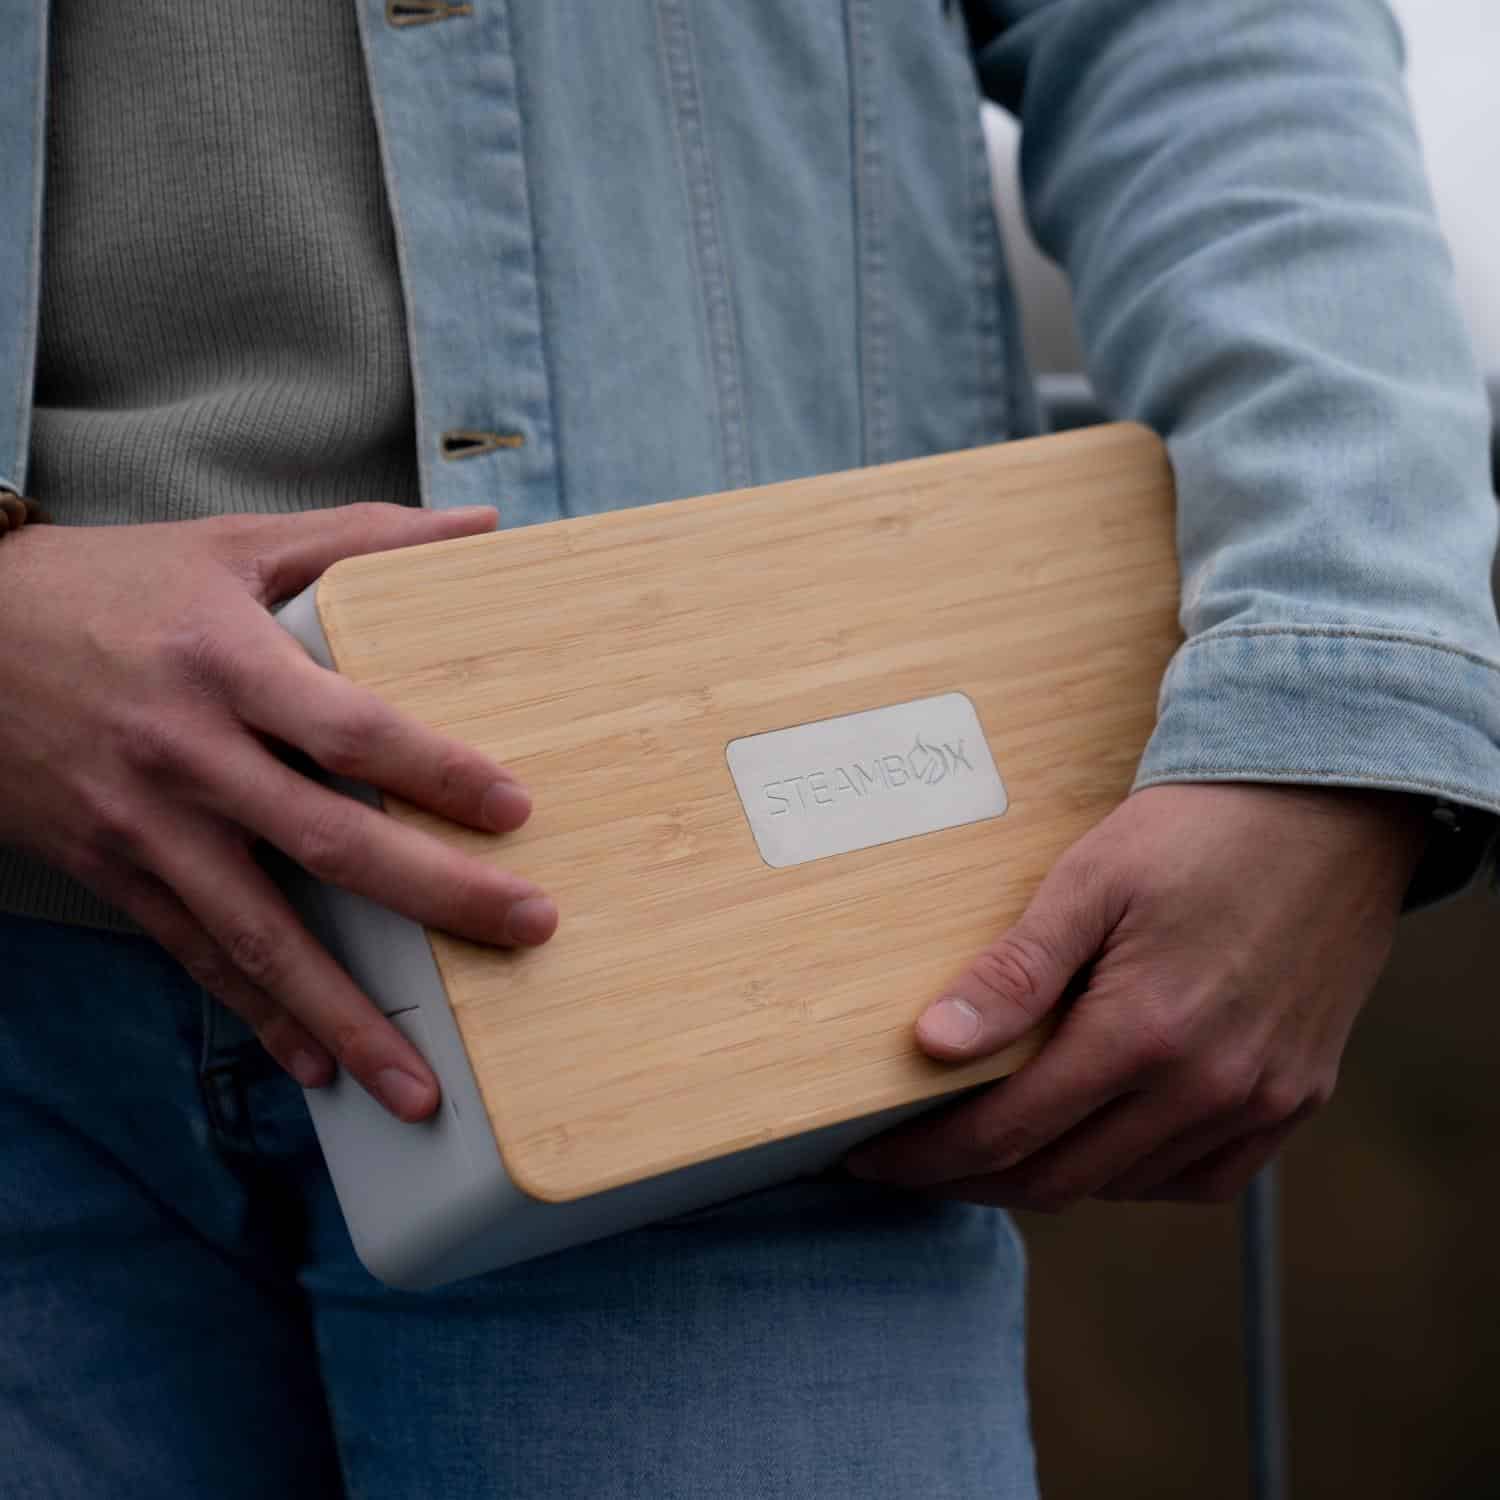 A cheese sandwich for lunch? Steambox has a different take on that